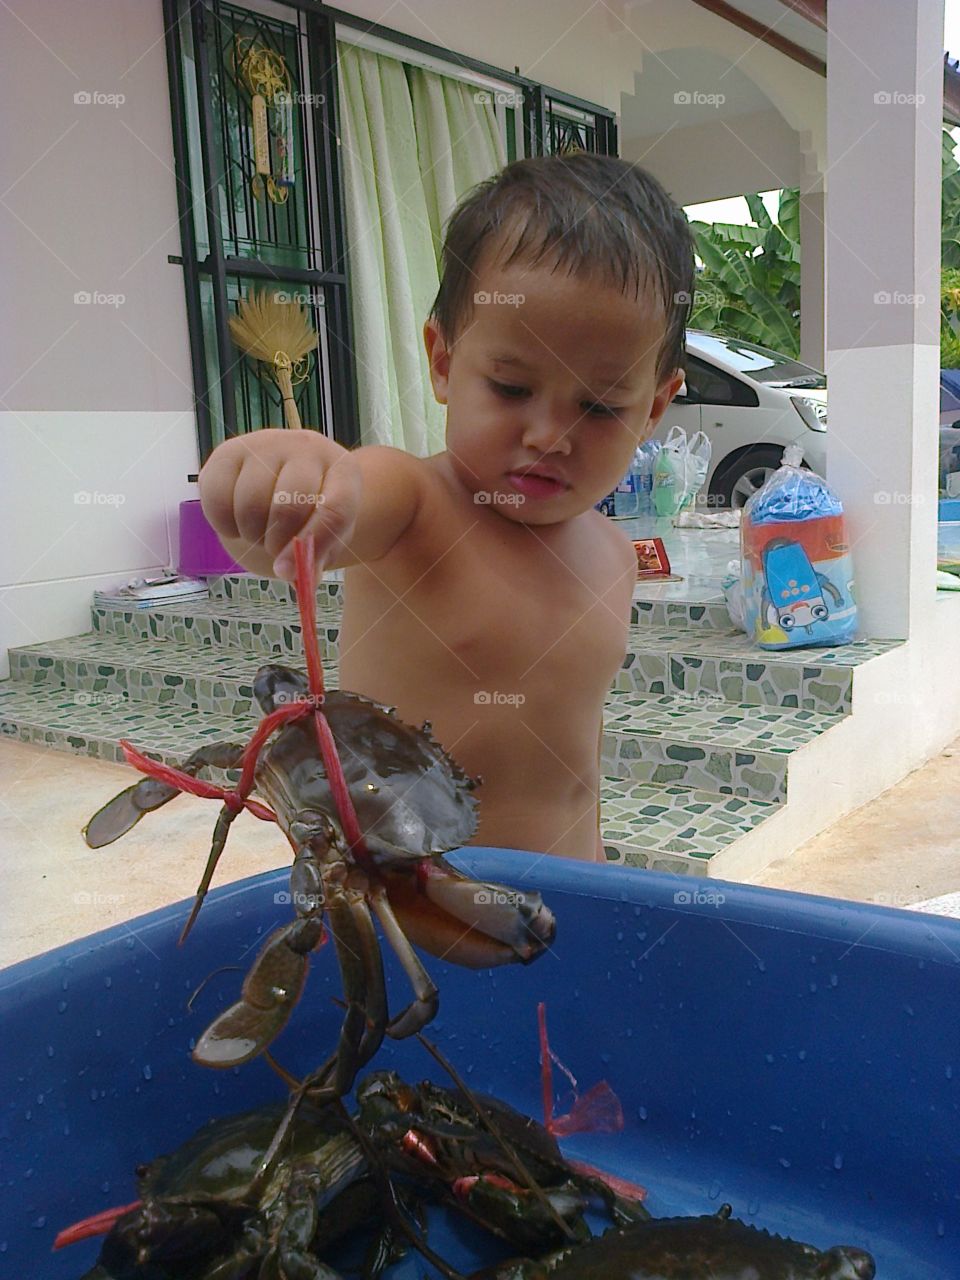 Kid holding crab. young boy get interested at a sea crab